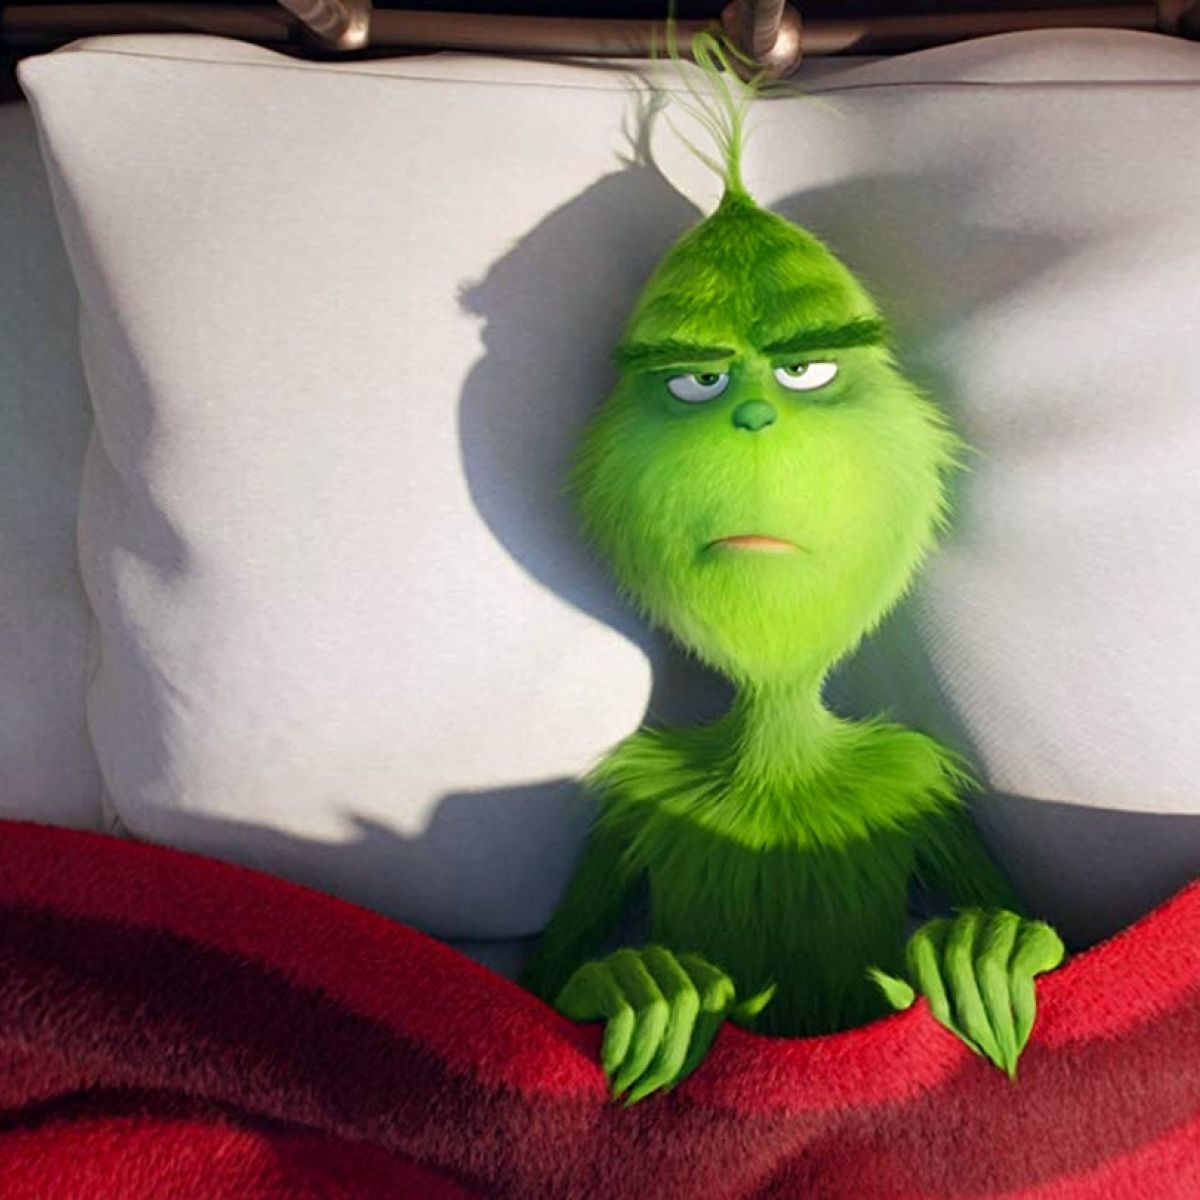 How The Grinch Stole Christmas Porn - The Grinch, as voiced by Benedict Cumberbatch, is too nice